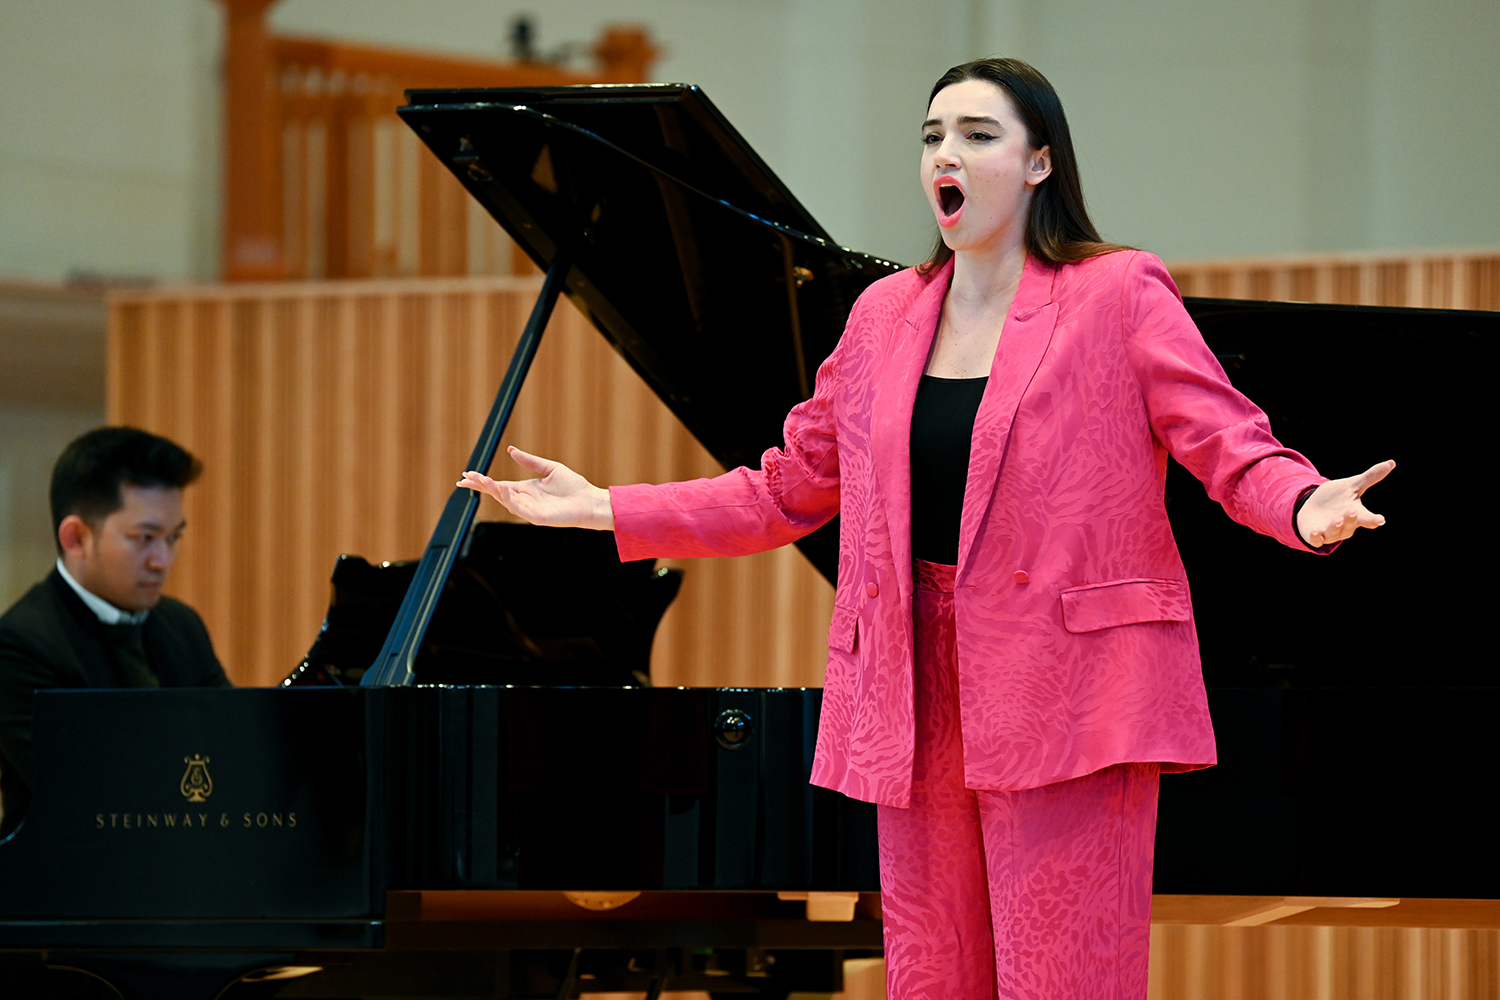 A woman wearing a pink suit sings on stage with a pianist playing in the background